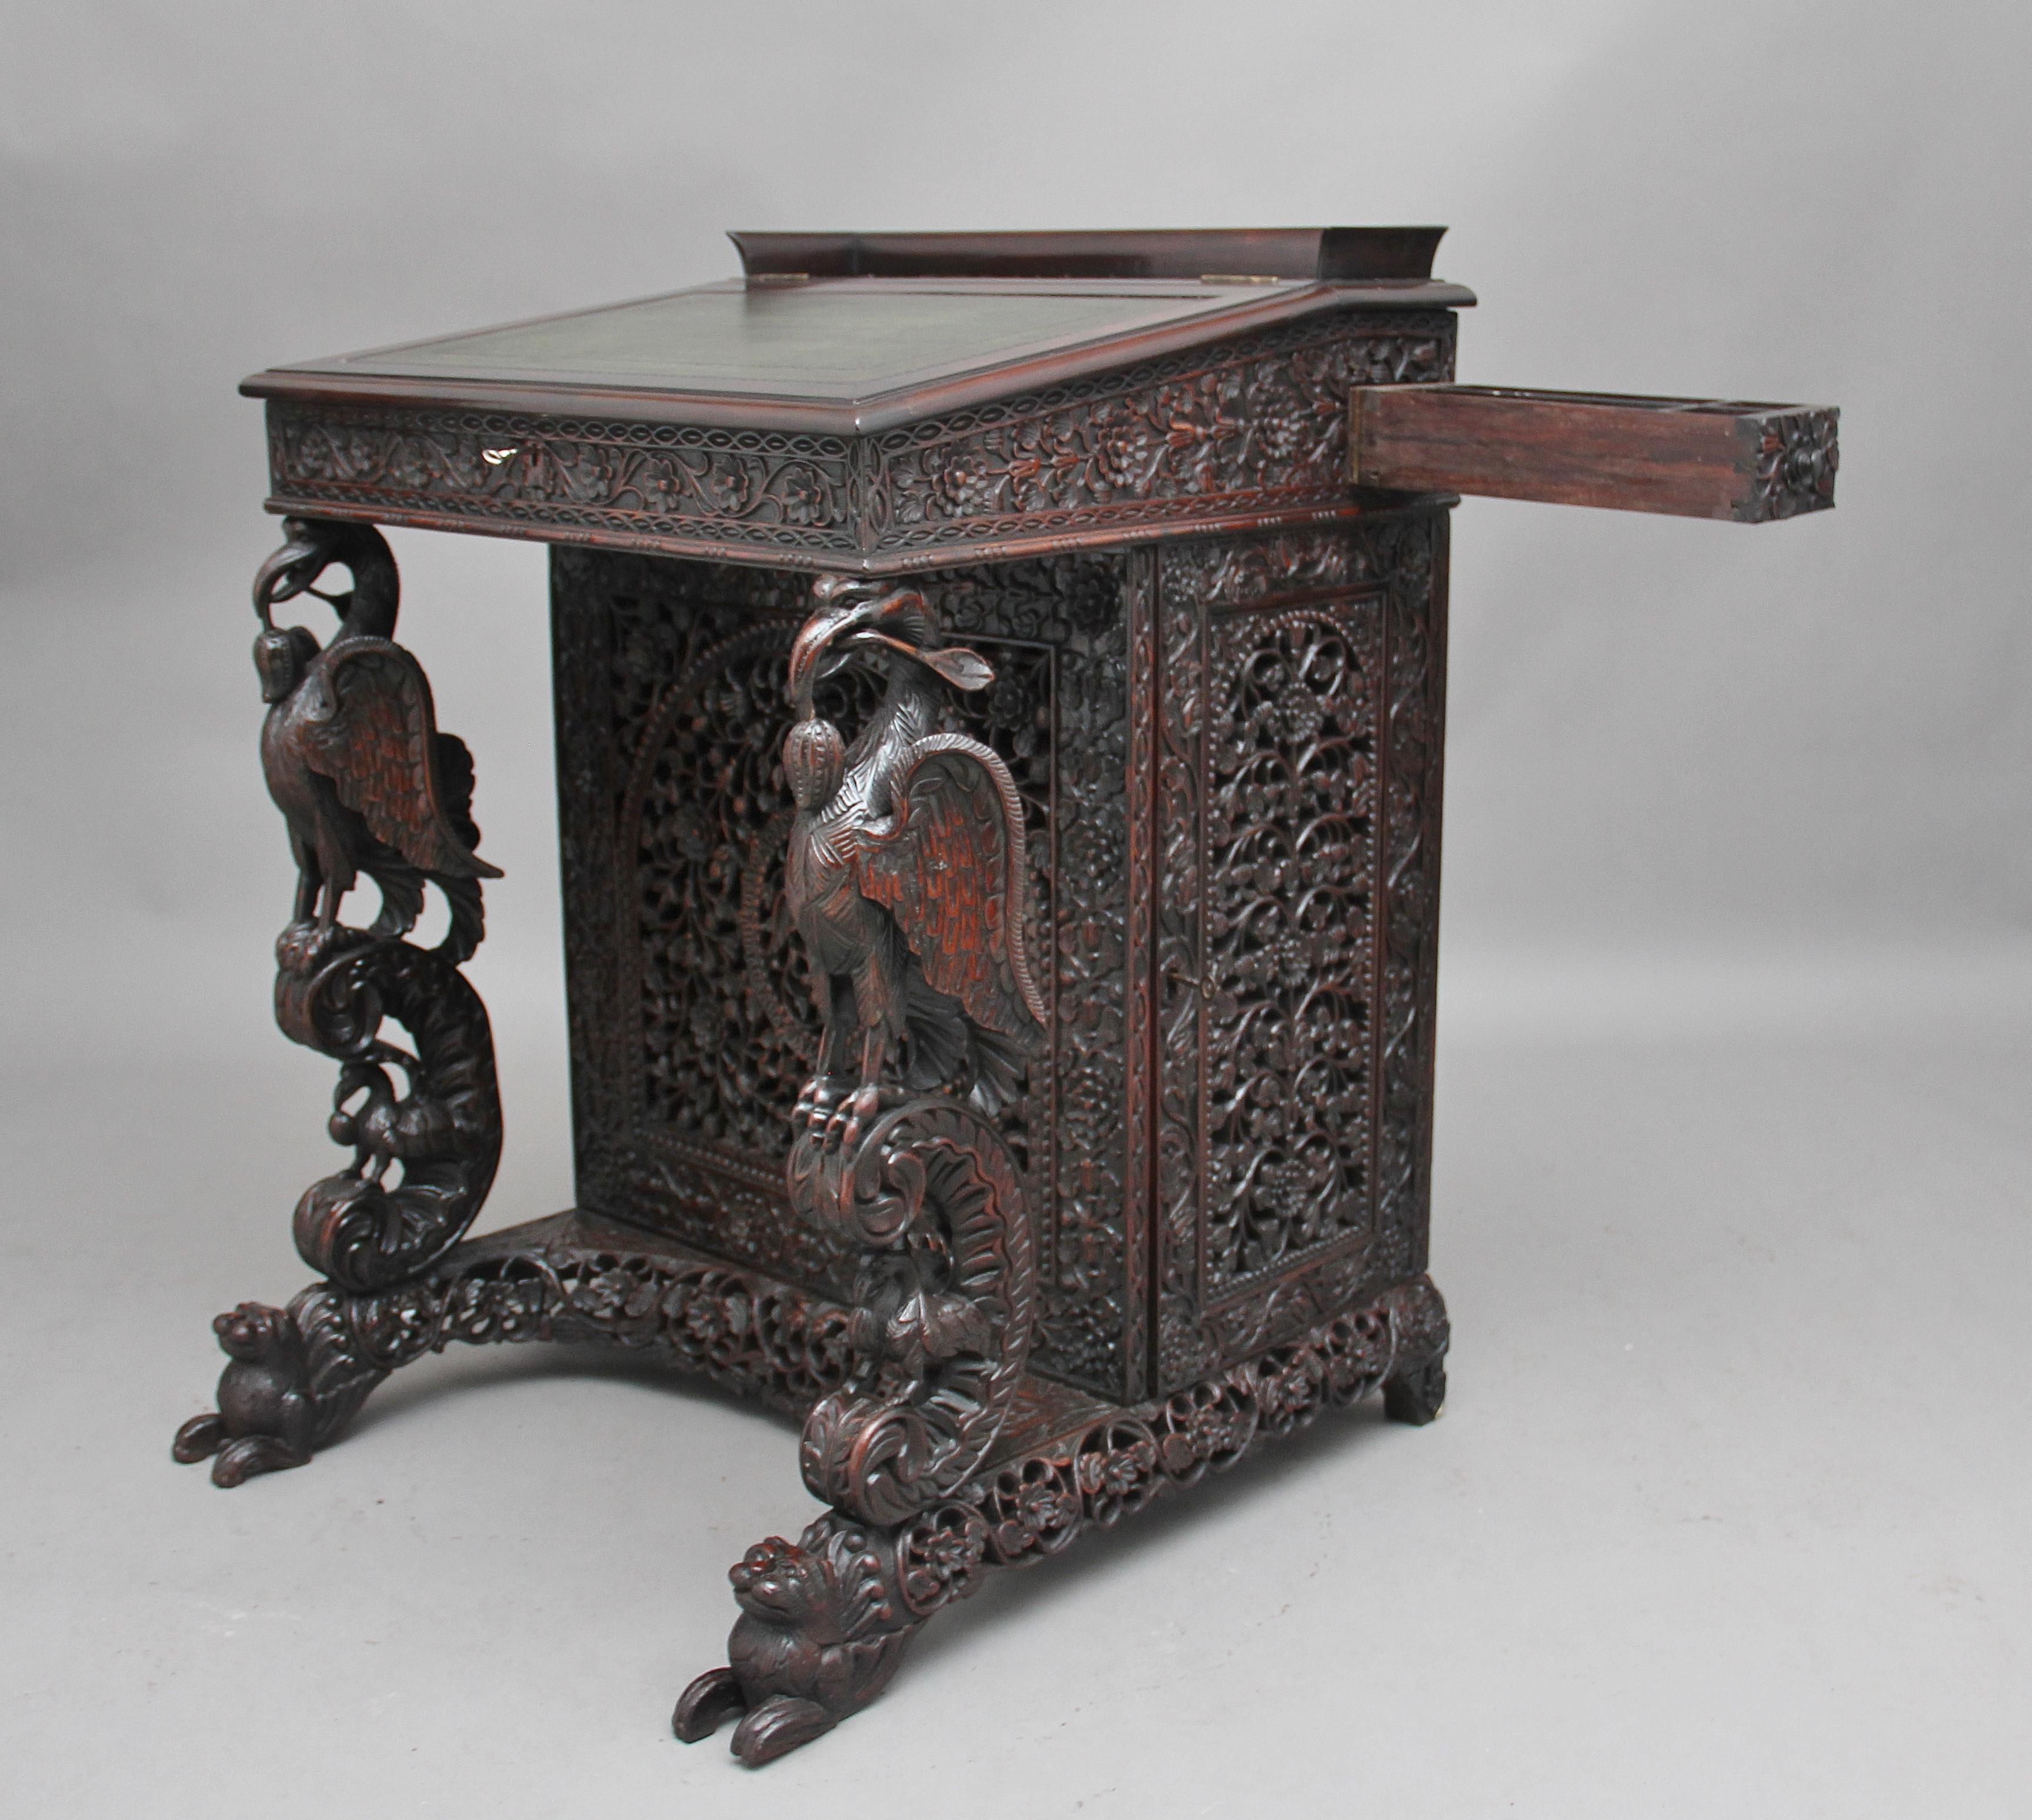 Teak 19th Century Anglo-Indian carved davenport with carved griffin supports